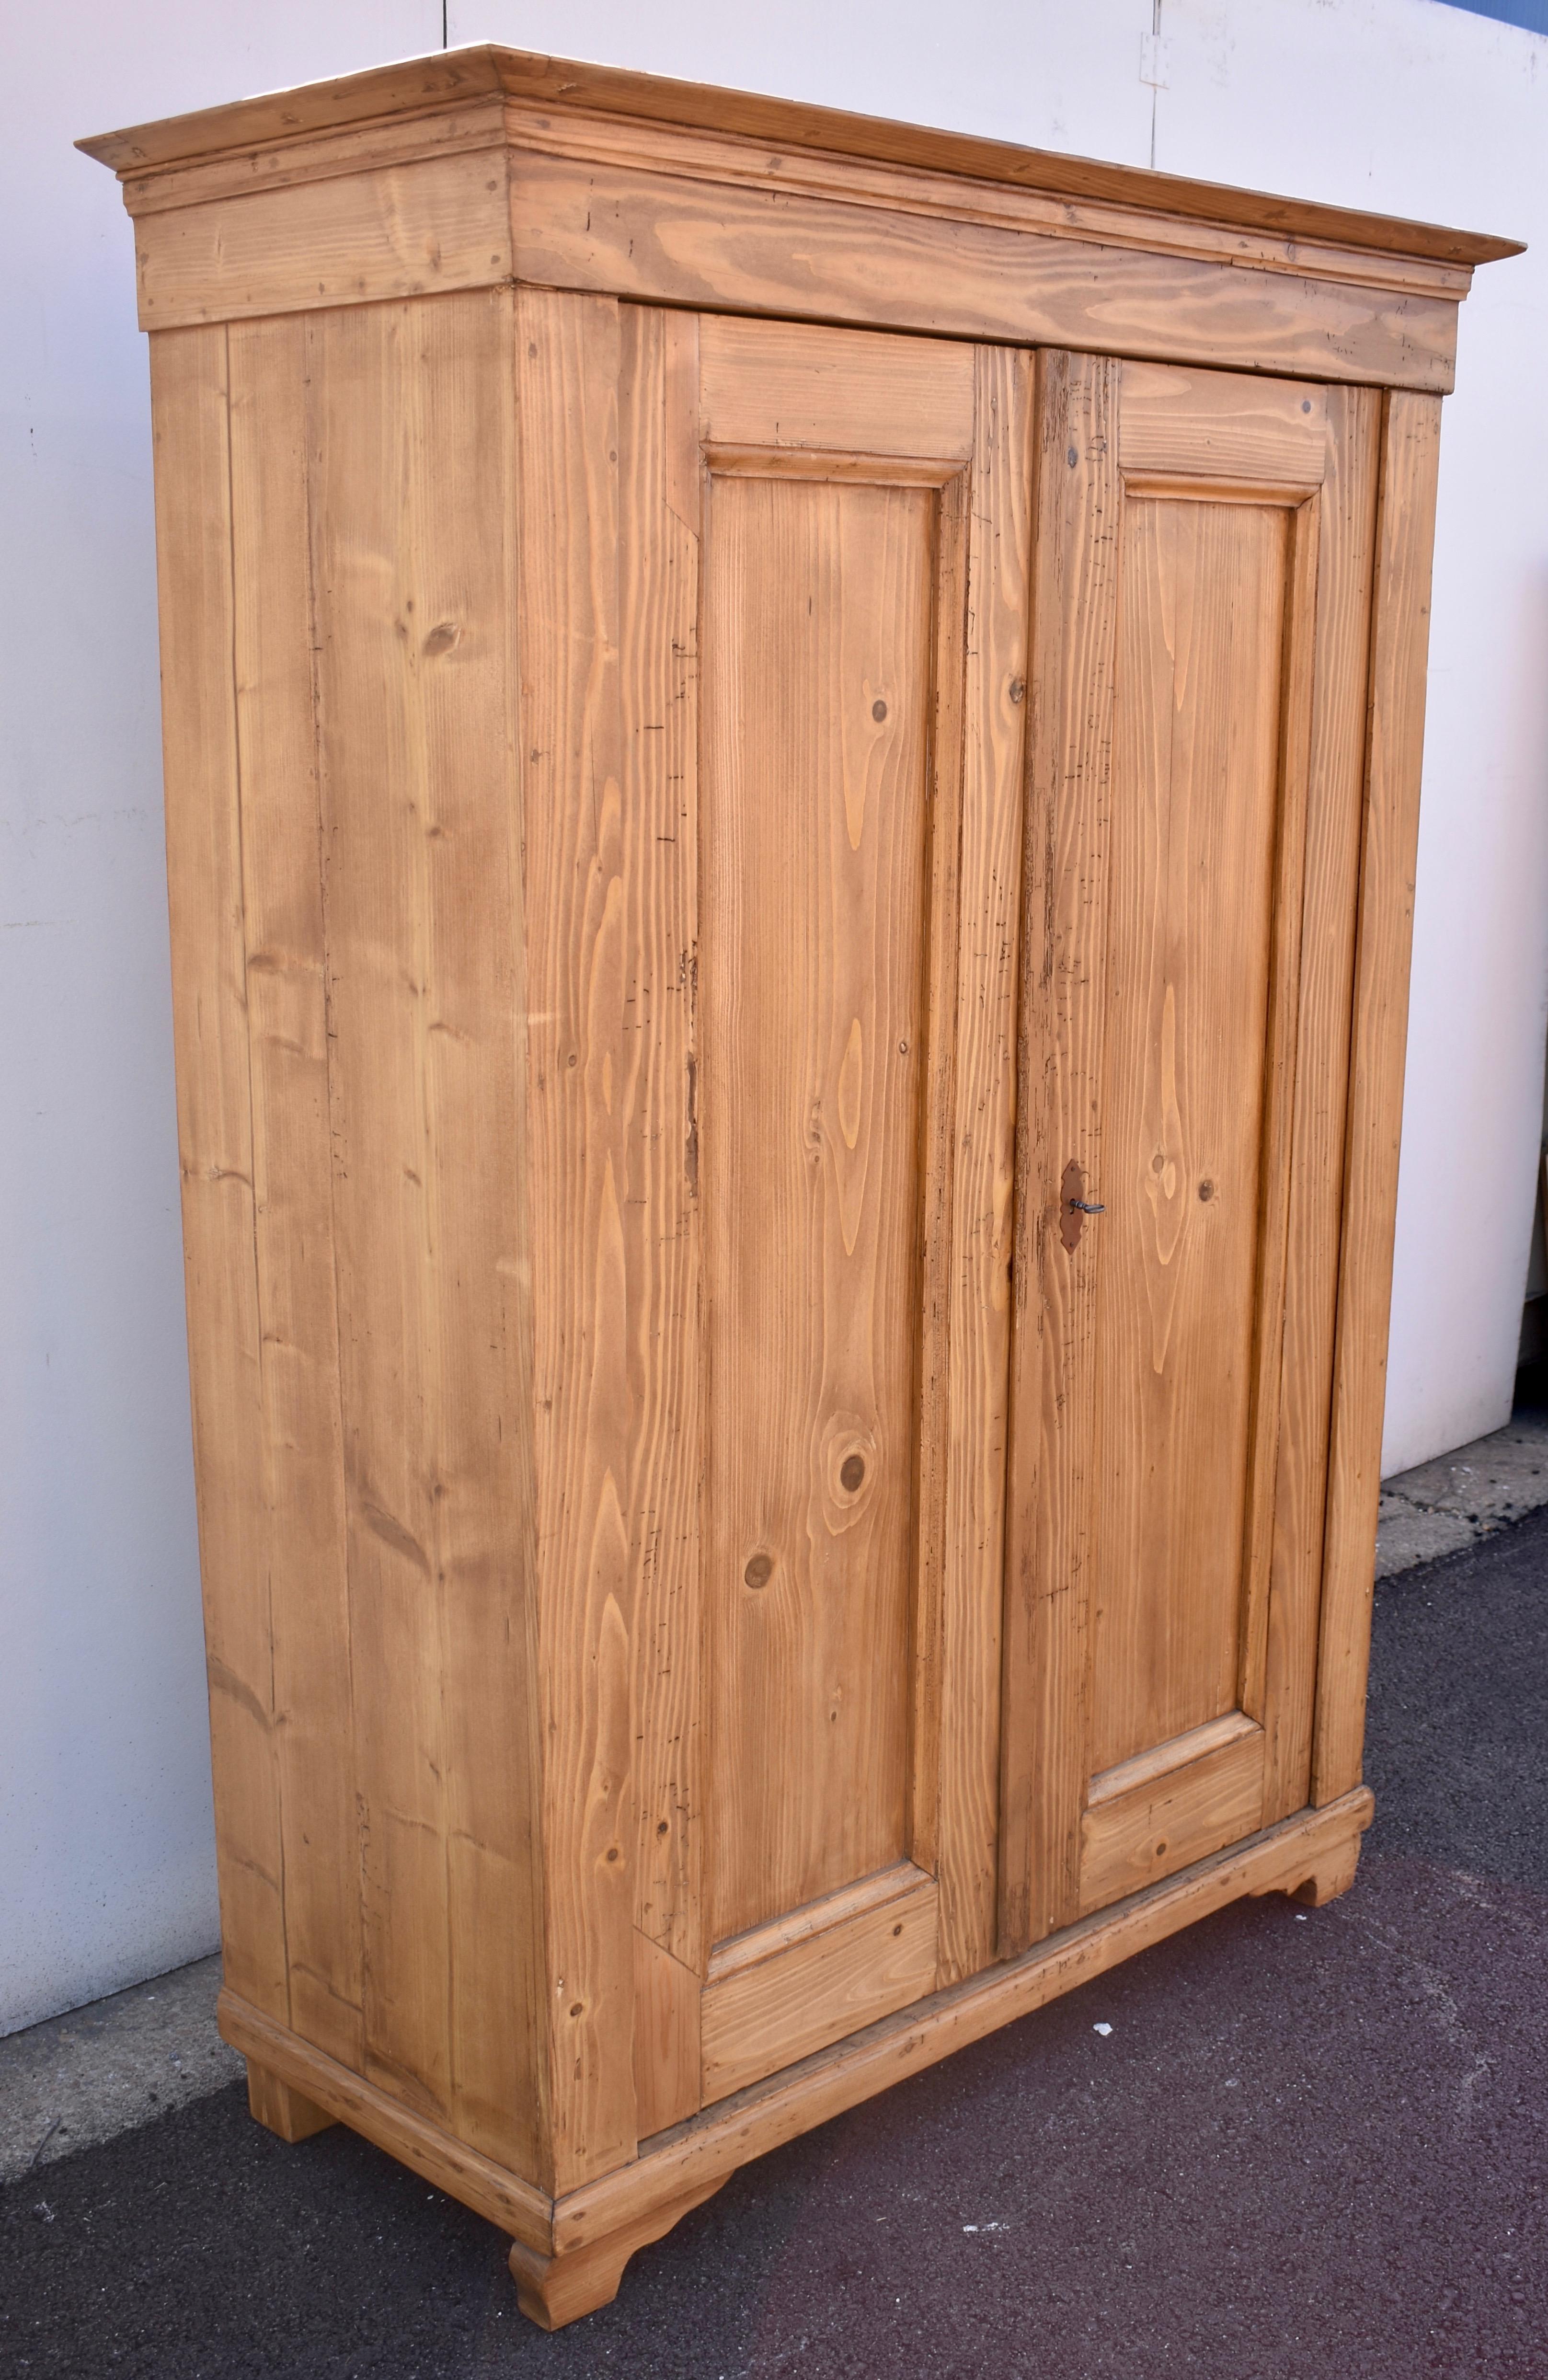 This relatively plain and simple armoire is an early piece, well-built from heavy stock with a strong grain pattern.  Mortise and tenon joints, moldings and trim, are secured with wooden pegs, as is the primitive crown.  The doors open on pivot